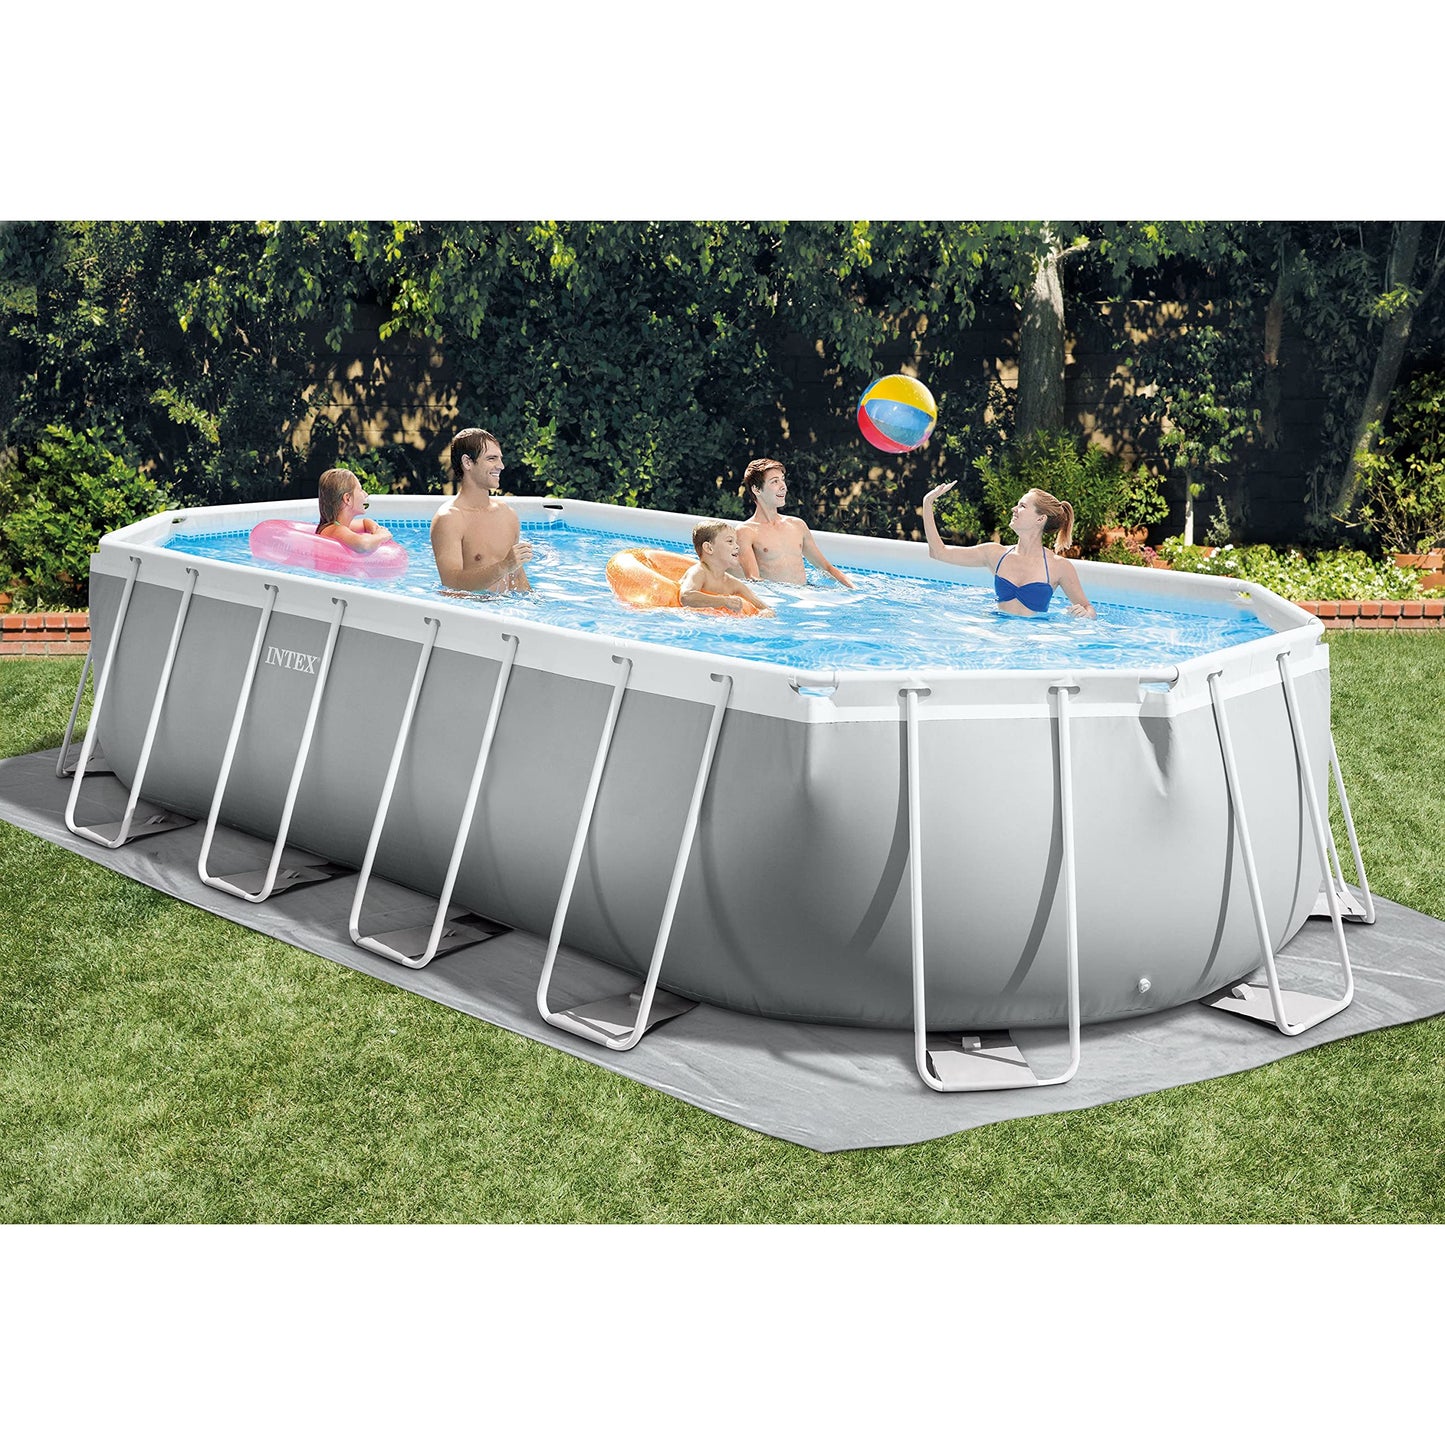 INTEX 26797EH 20ft x 10ft x 48in Prism Frame Pool with Cartridge Filter Pump 20ft x 10ft x 48in / Oval